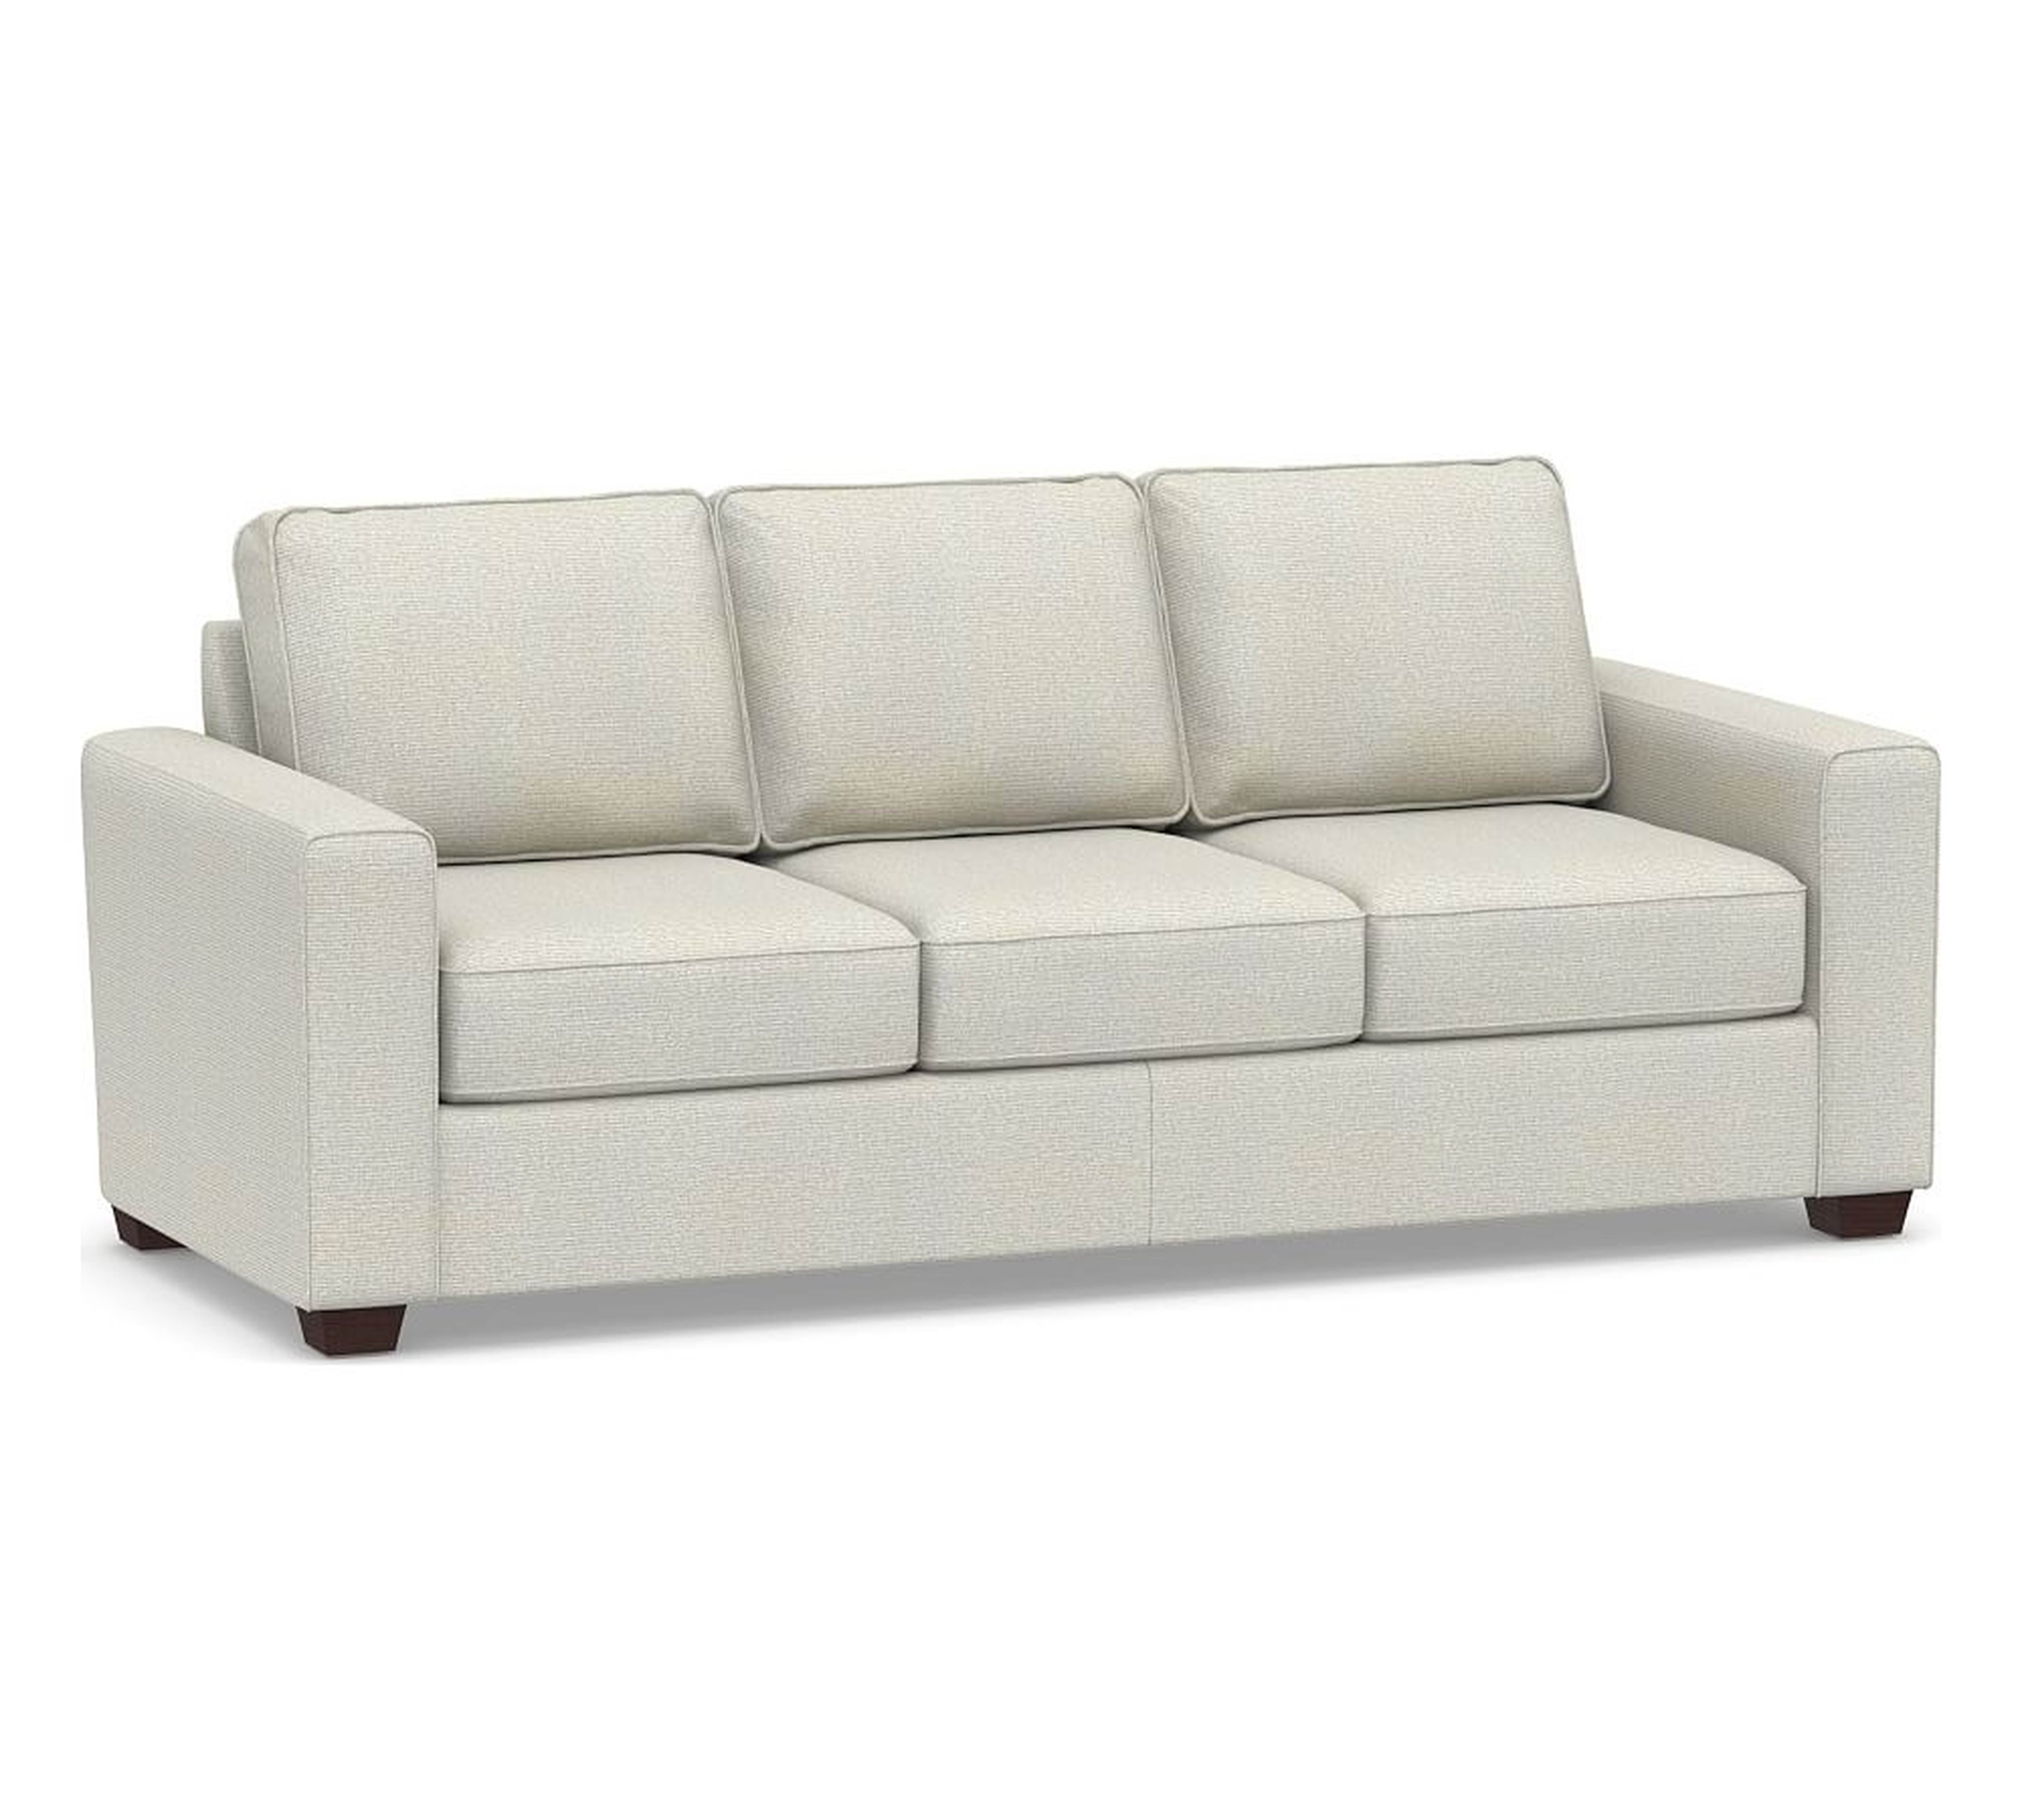 SoMa Fremont Square Arm Upholstered Grand Sofa 81", Polyester Wrapped Cushions, Performance Heathered Basketweave Dove - Pottery Barn